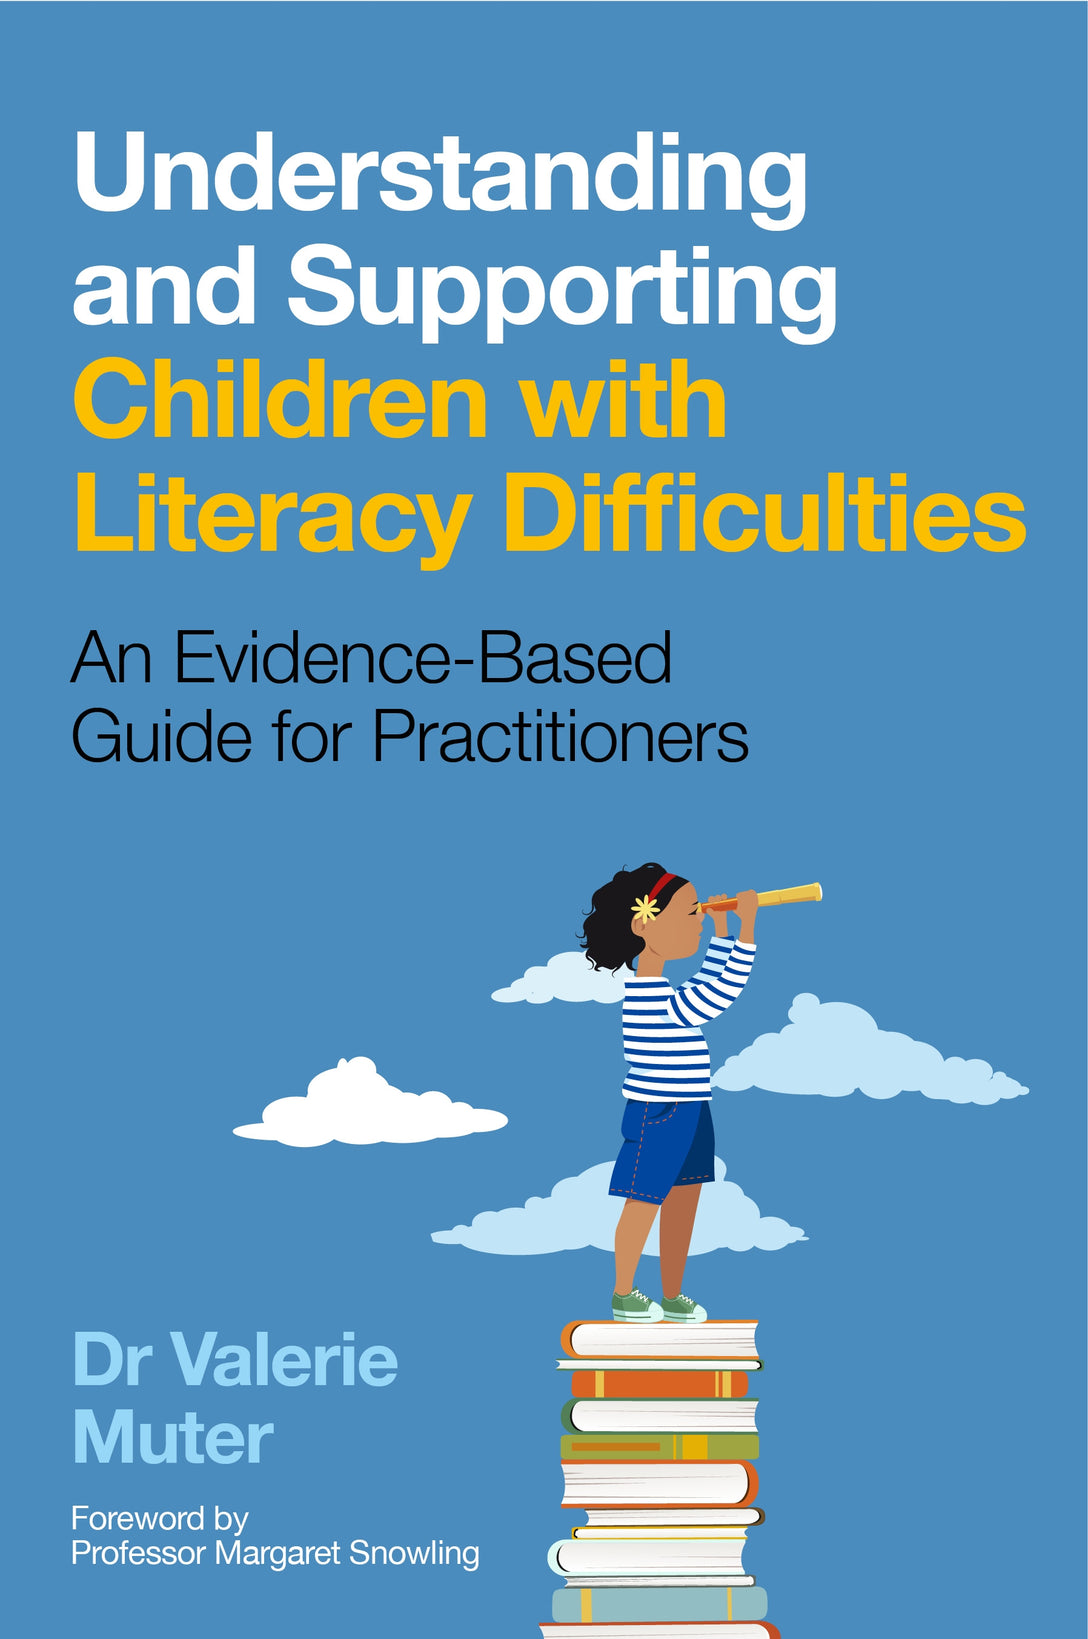 Understanding and Supporting Children with Literacy Difficulties by Maggie Snowling, Valerie Muter